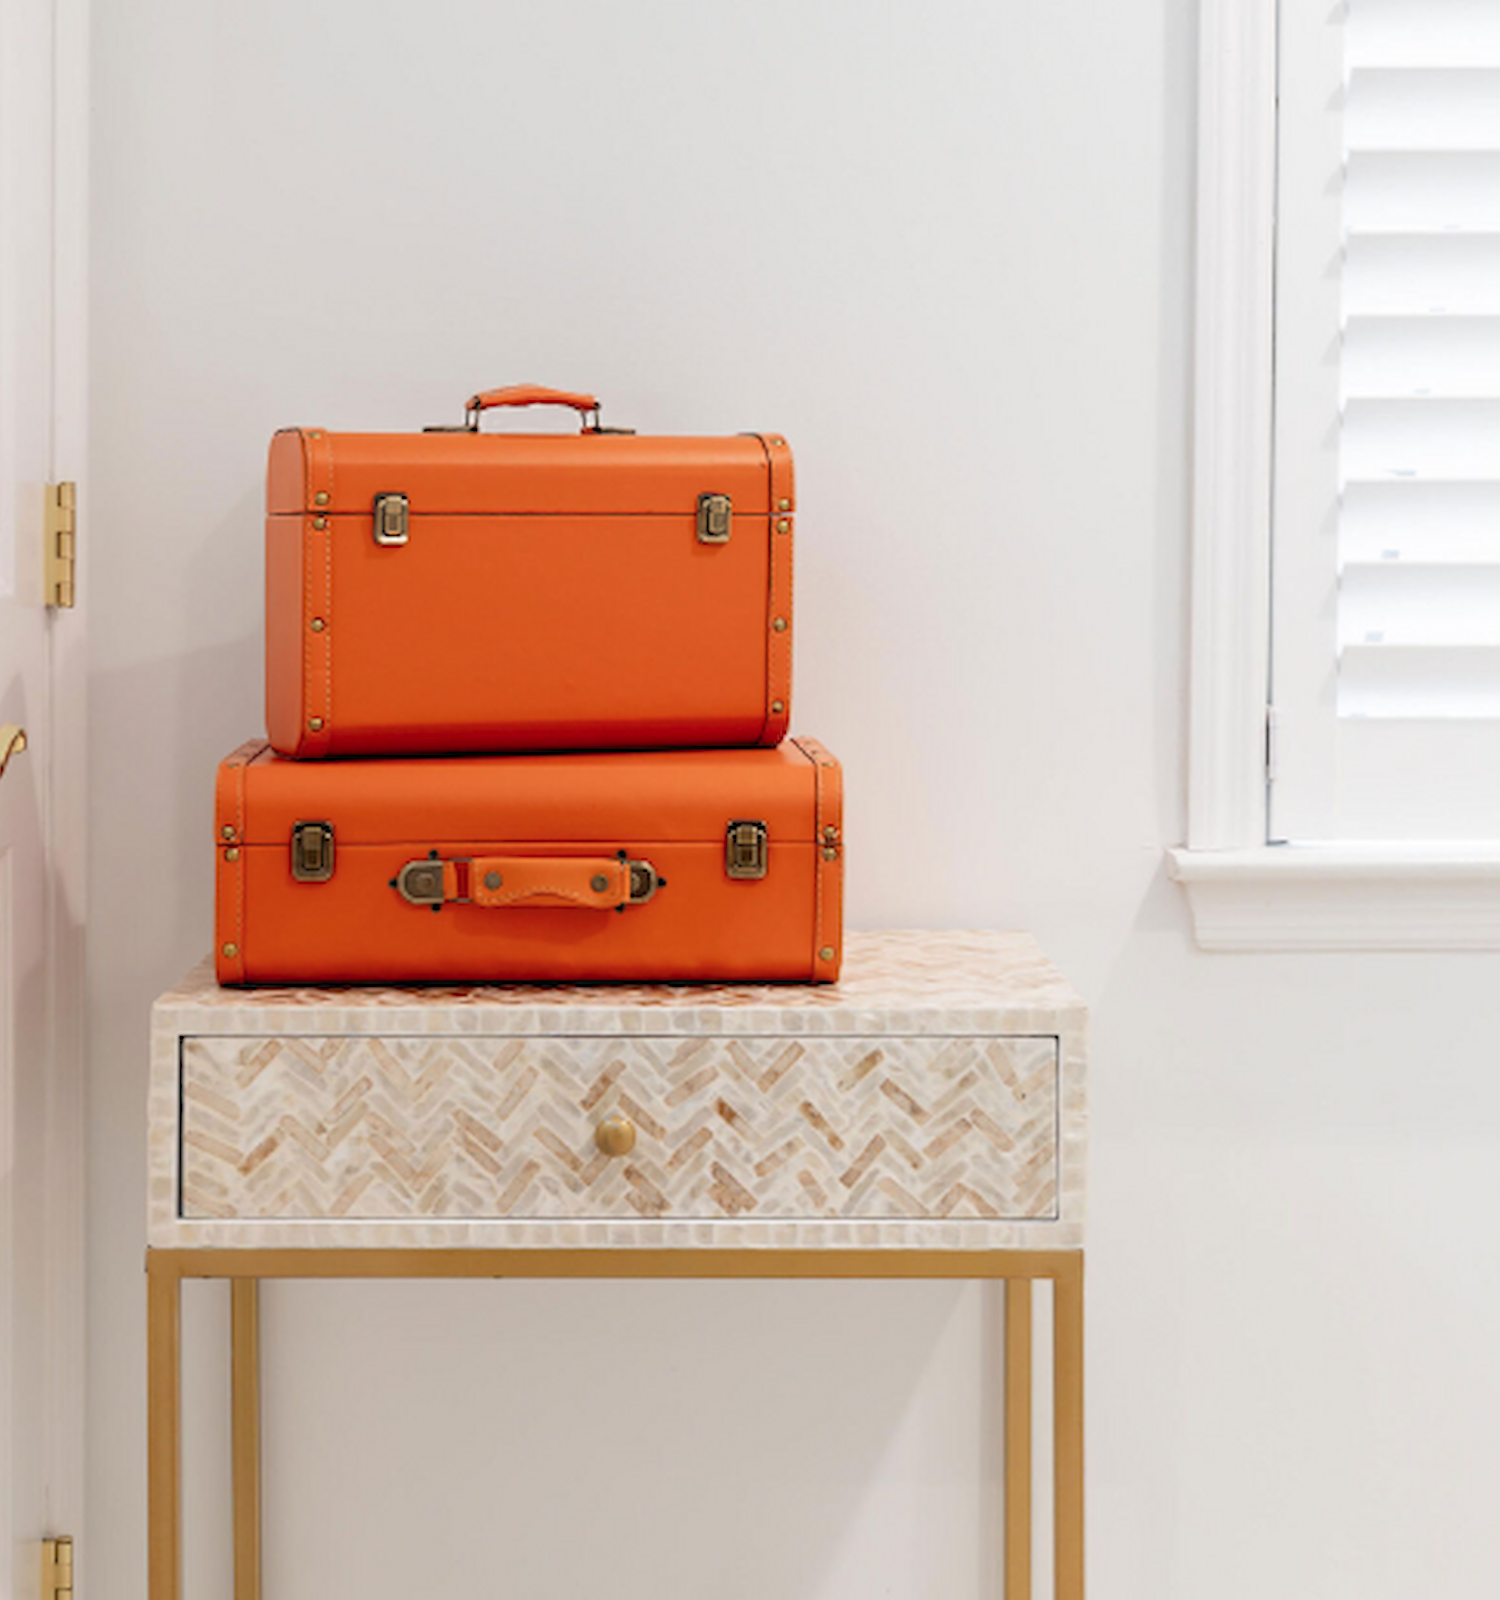 Two orange suitcases are stacked on a small table with a herringbone pattern in a minimalist room with white walls and a shuttered window ending the sentence.